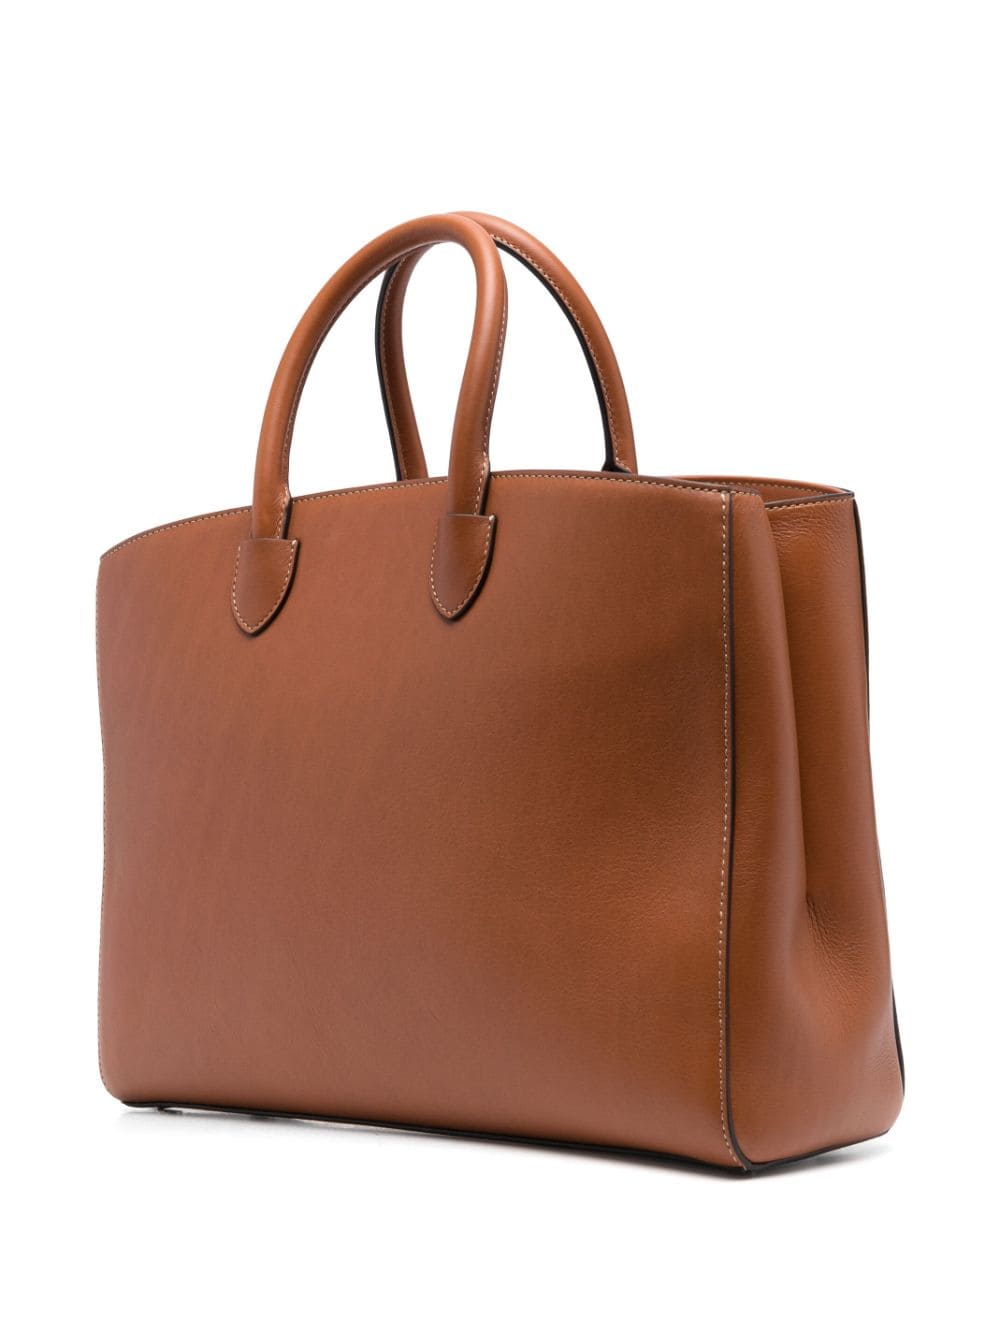 aspinal of london madison leather tote bag - brown